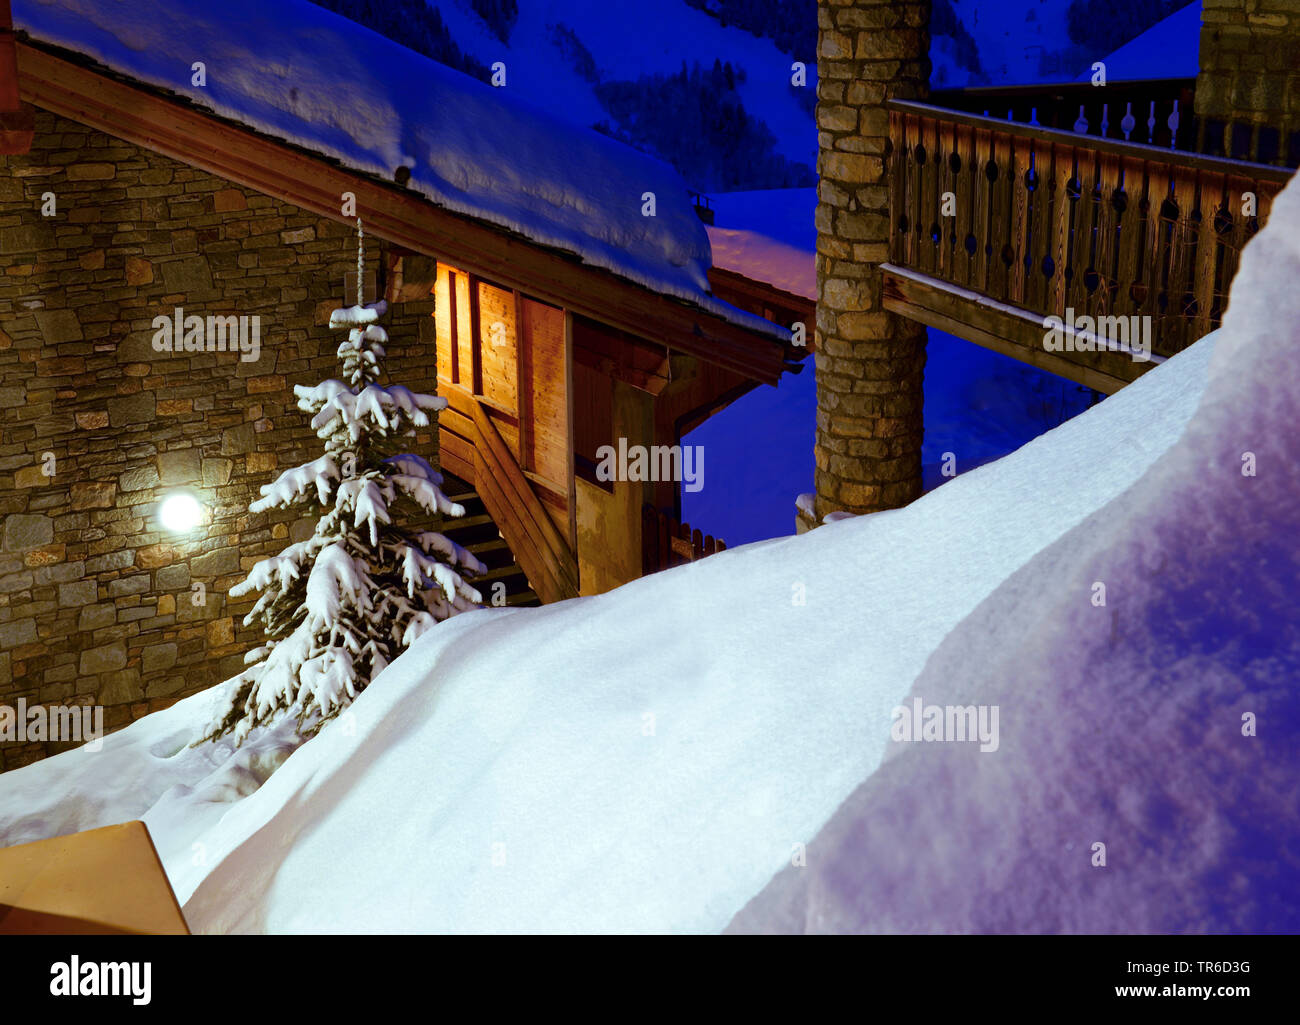 snow-covered chalets at night, France, Savoie, Sainte Foy Tarentaise Stock Photo